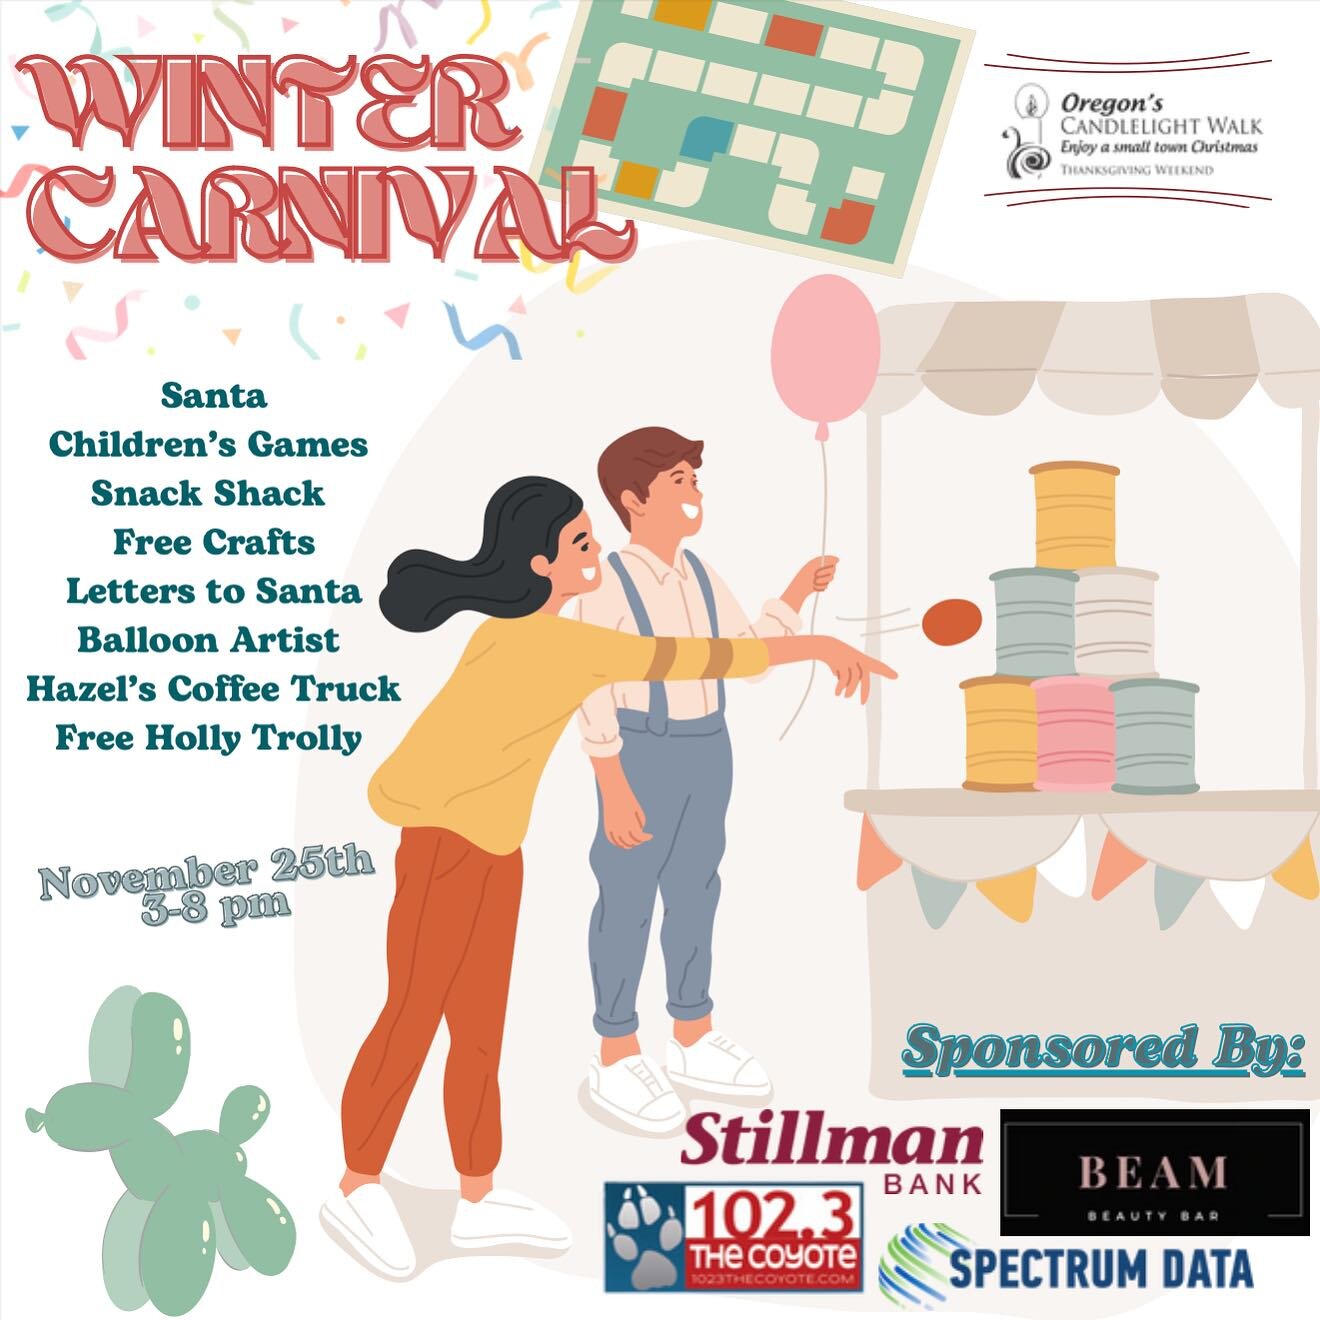 Our Winter Carnival is a crowd favorite especially with the littles! Stop and visit with Santa, okay games, make crafts and so much more! 🎅🏼❄️🎄

#candlelightwalk #smalltownchristmas #christmas #illinois #christmasmagic #christmascountdown #oldfash